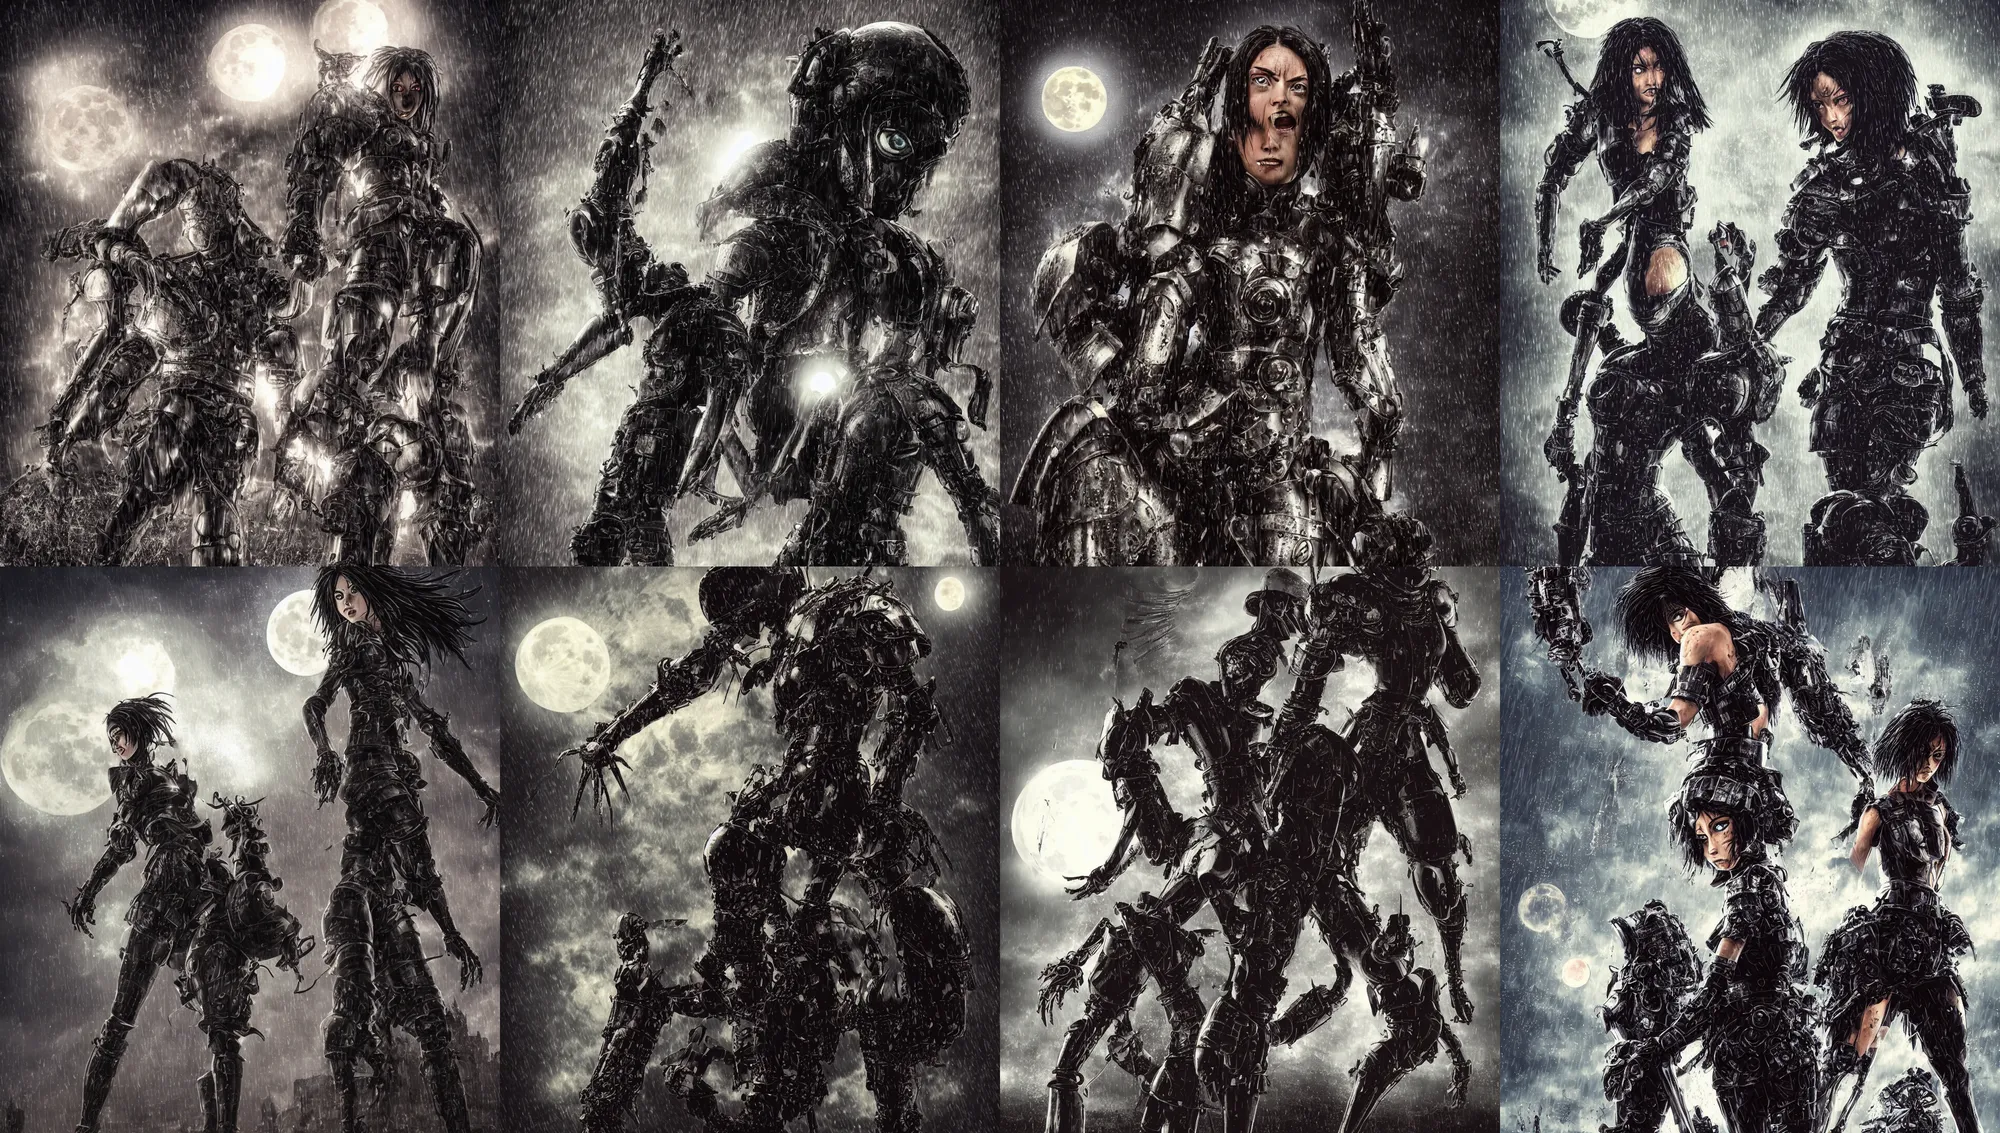 Prompt: angry anthropomorphic pete, wearing rain soaked armour in heavy rain, incredibly fine detailed portrait, battle angel alita, dynamic angle, elegant, full body profile, 2 0 0 mm focal length, highly detailed, dramatic full moon lighting, many fireflies, gothic castle prodominently in the background, movie cover